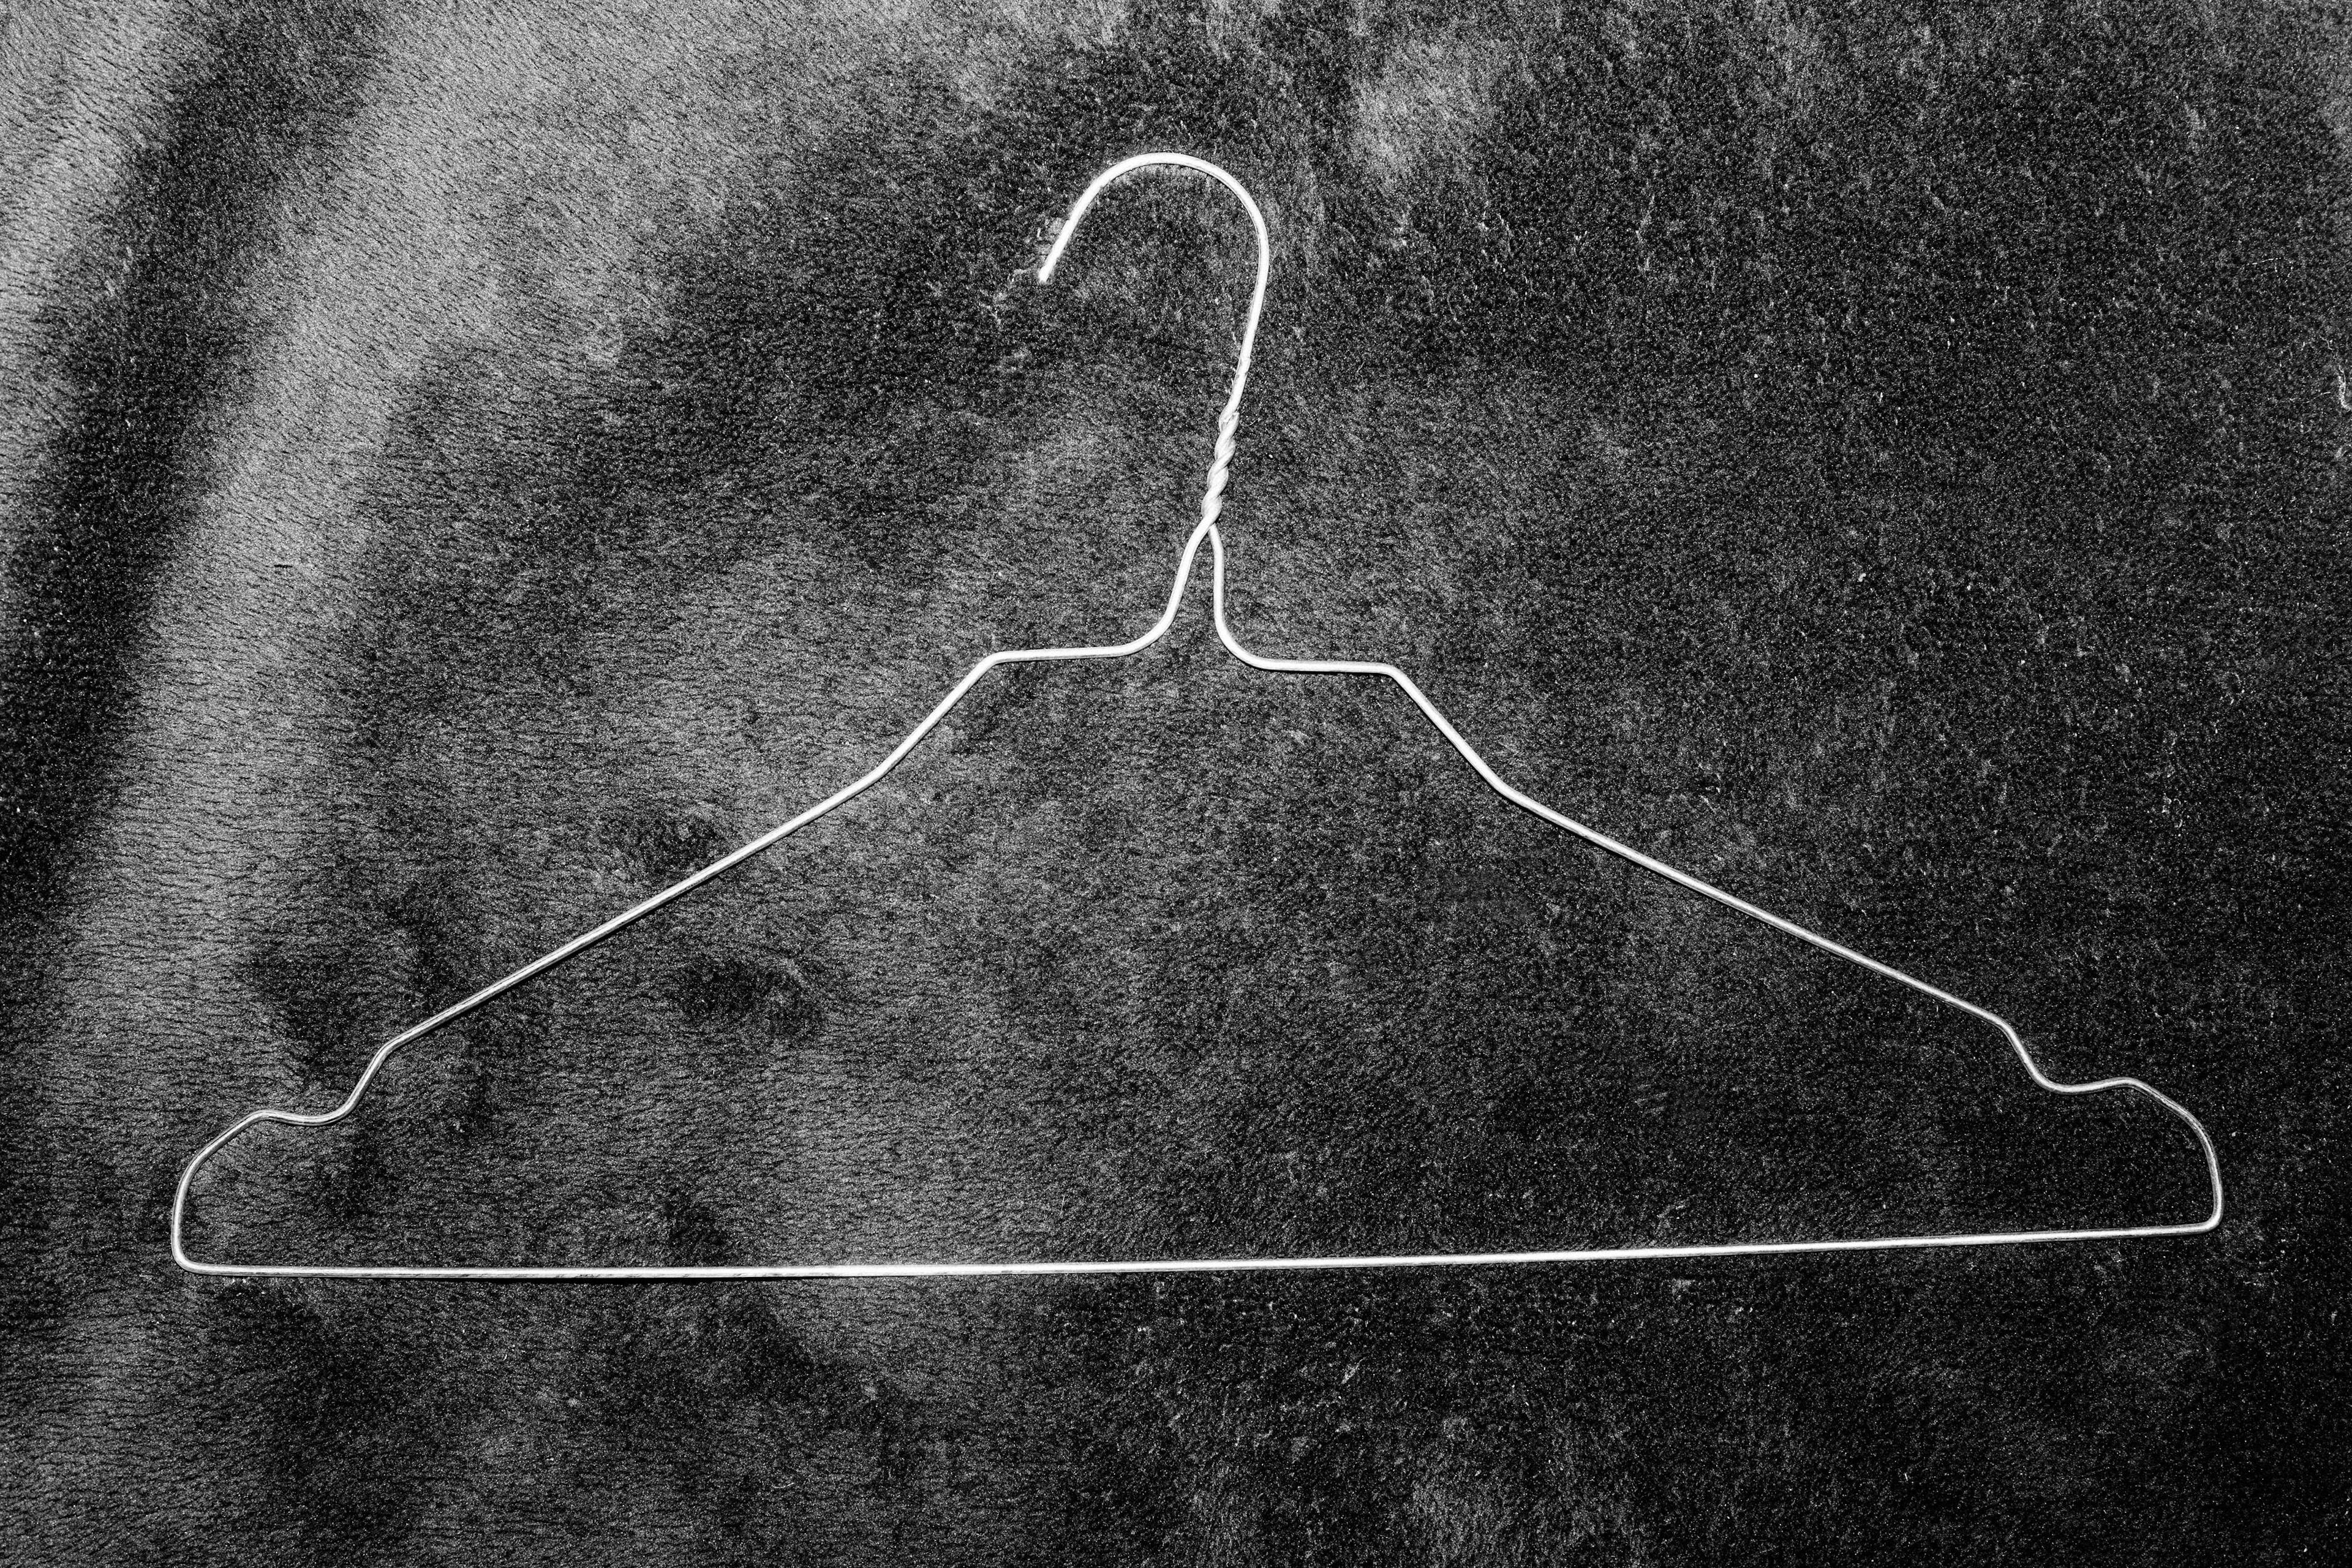 Laia Abril; 'Coat Hanger' from 'A History Of Misogyny, Chapter One, On Abortion;' 2017: "Desperate pregnant women have been known to probe themselves with knitting needles, whalebone, turkey feathers, umbrella rods and the infamous coat hanger. These can cause infection, haemorrhage, sterility and death. Abortion rights advocates worldwide have long used the coat hanger to symbolize what the anti-choice movement is trying to avoid. Ironically, the risky DIY method is seeing a resurgence in the United States, as access to safe and legal abortion falters."